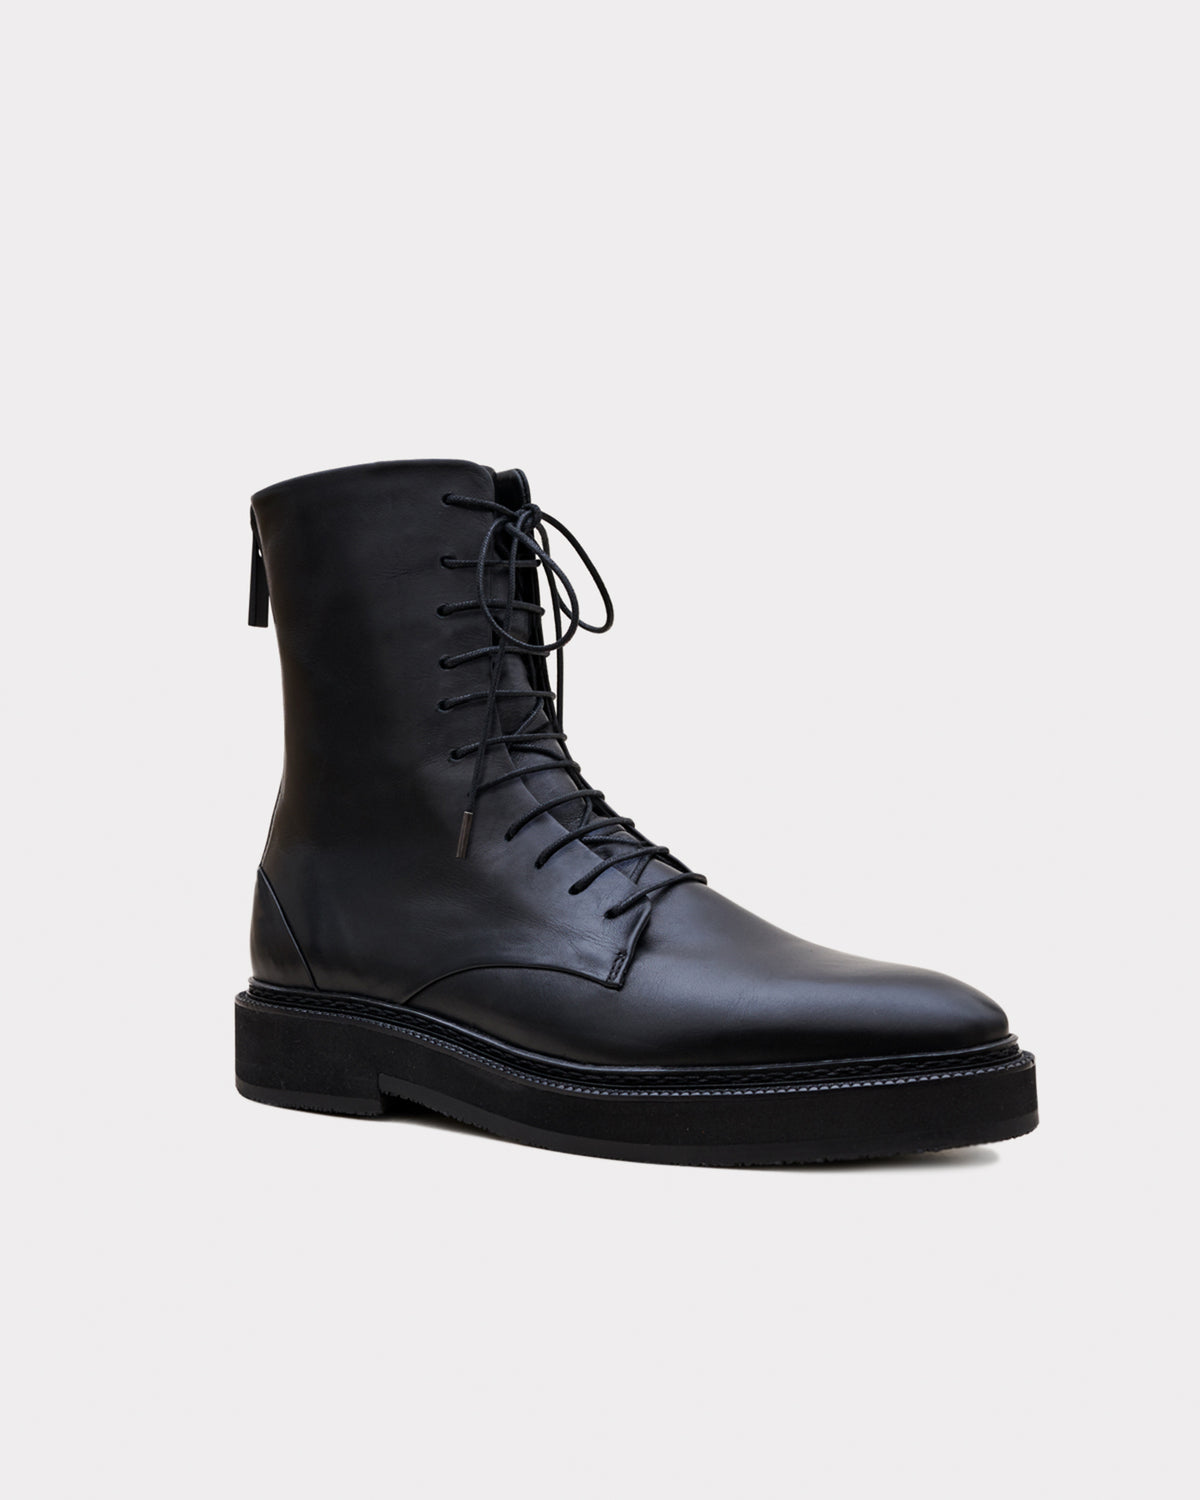 classic combat boot in black ethical leather